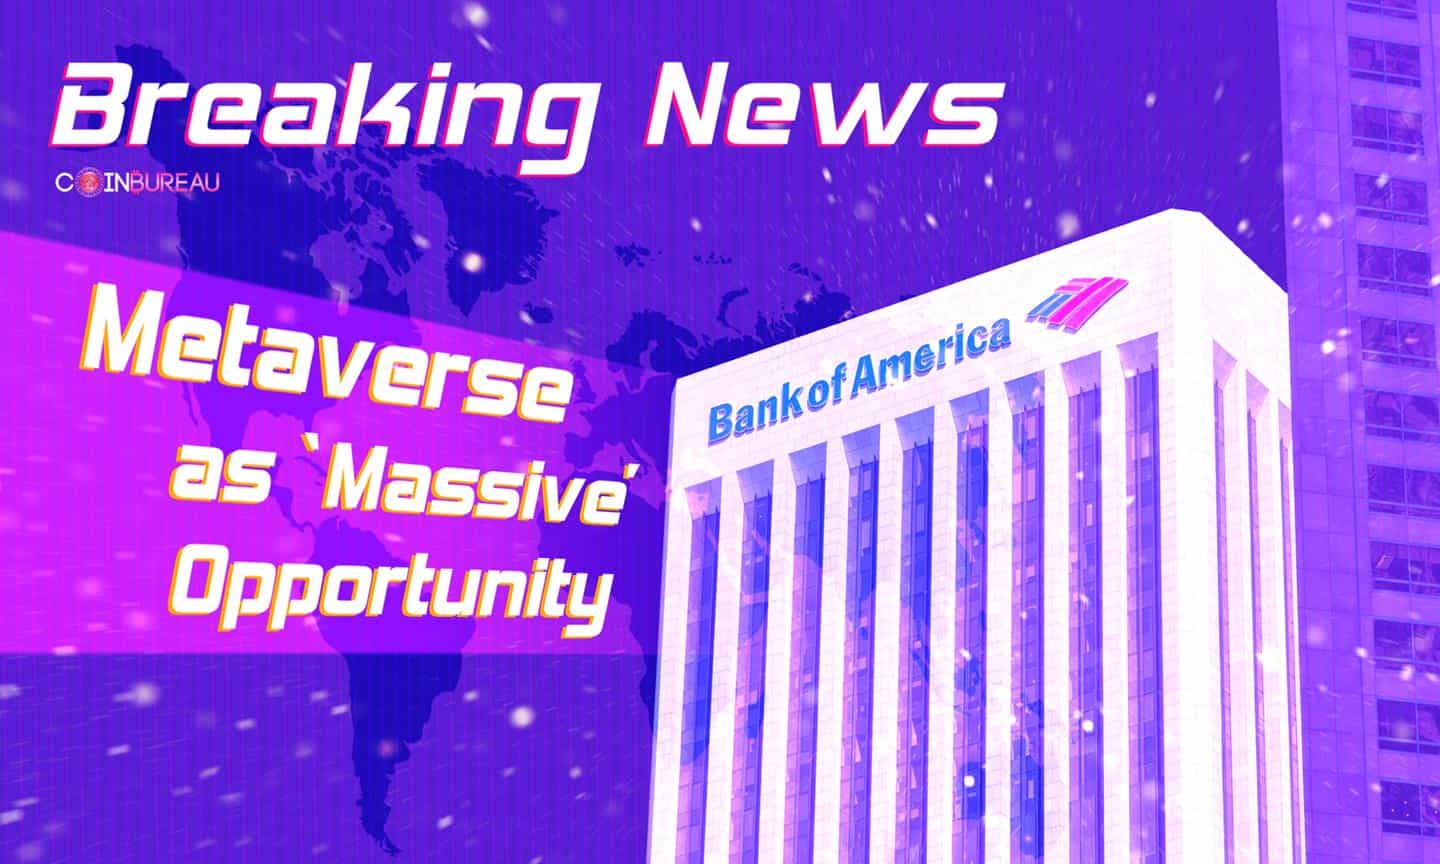 Bank of America Names Metaverse as Massive Opportunity